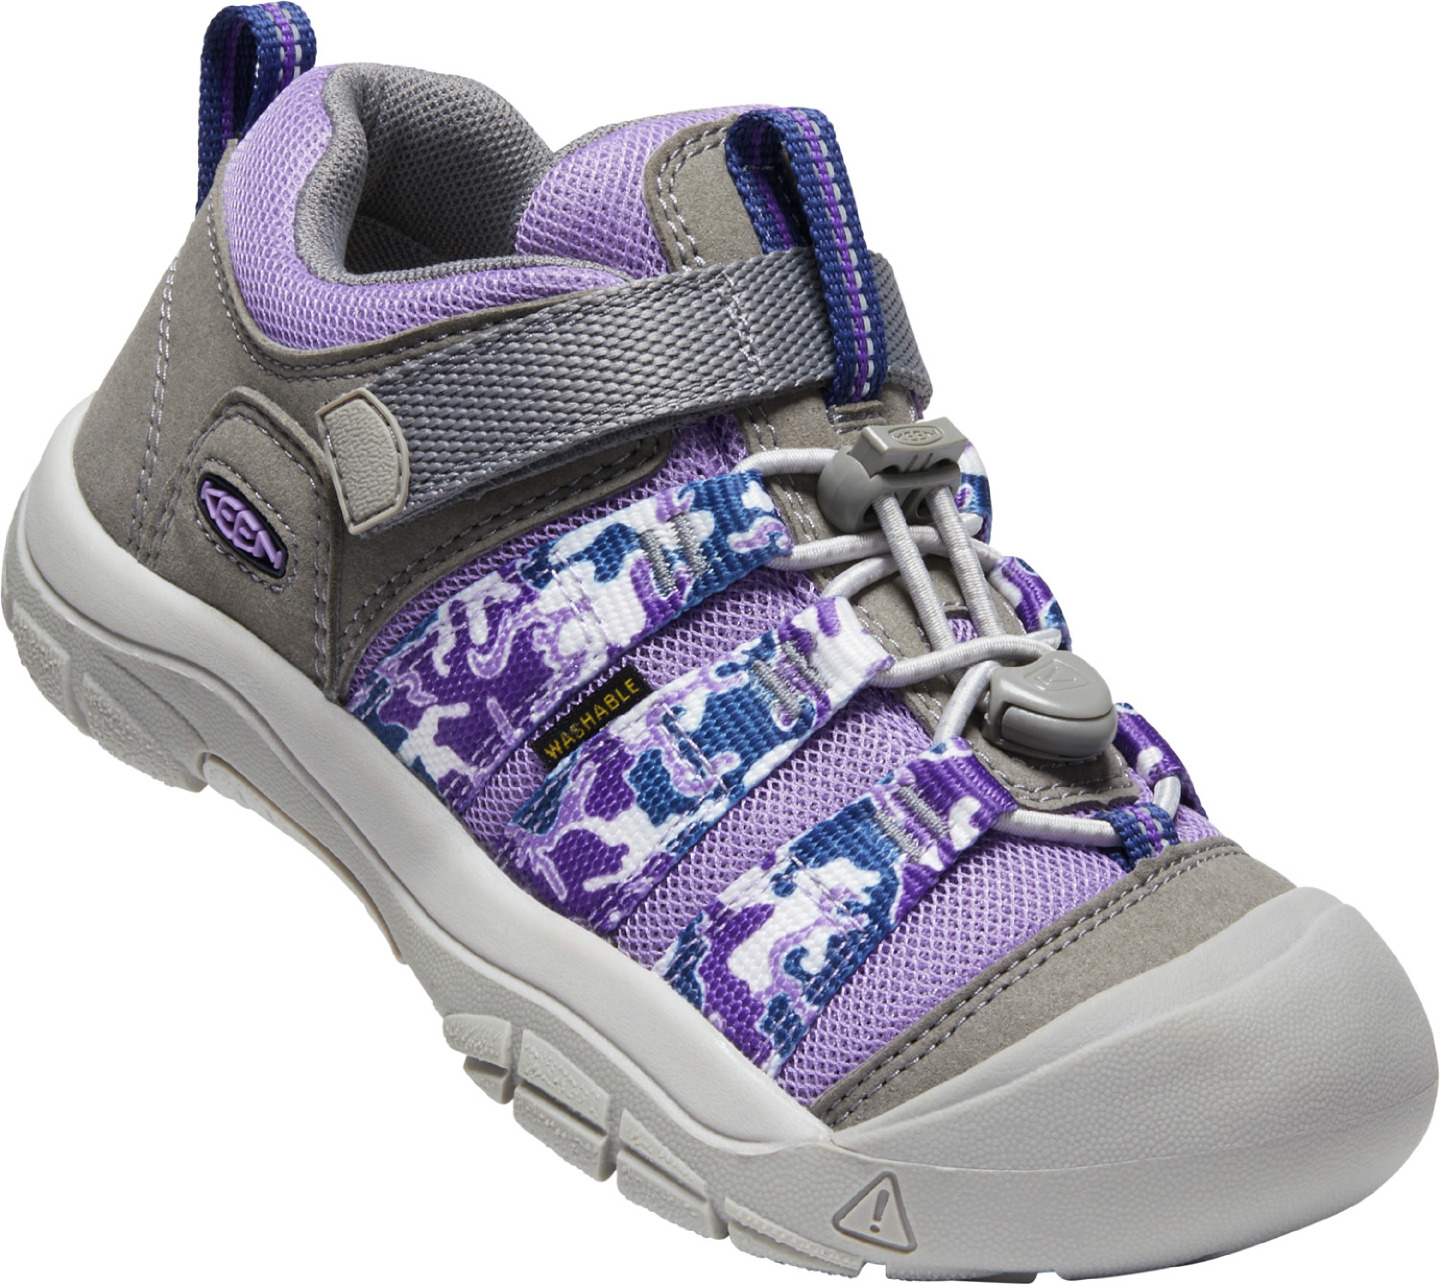 Boty Keen NEWPORT H2SHO YOUTH chalk violet/drizzle US 4